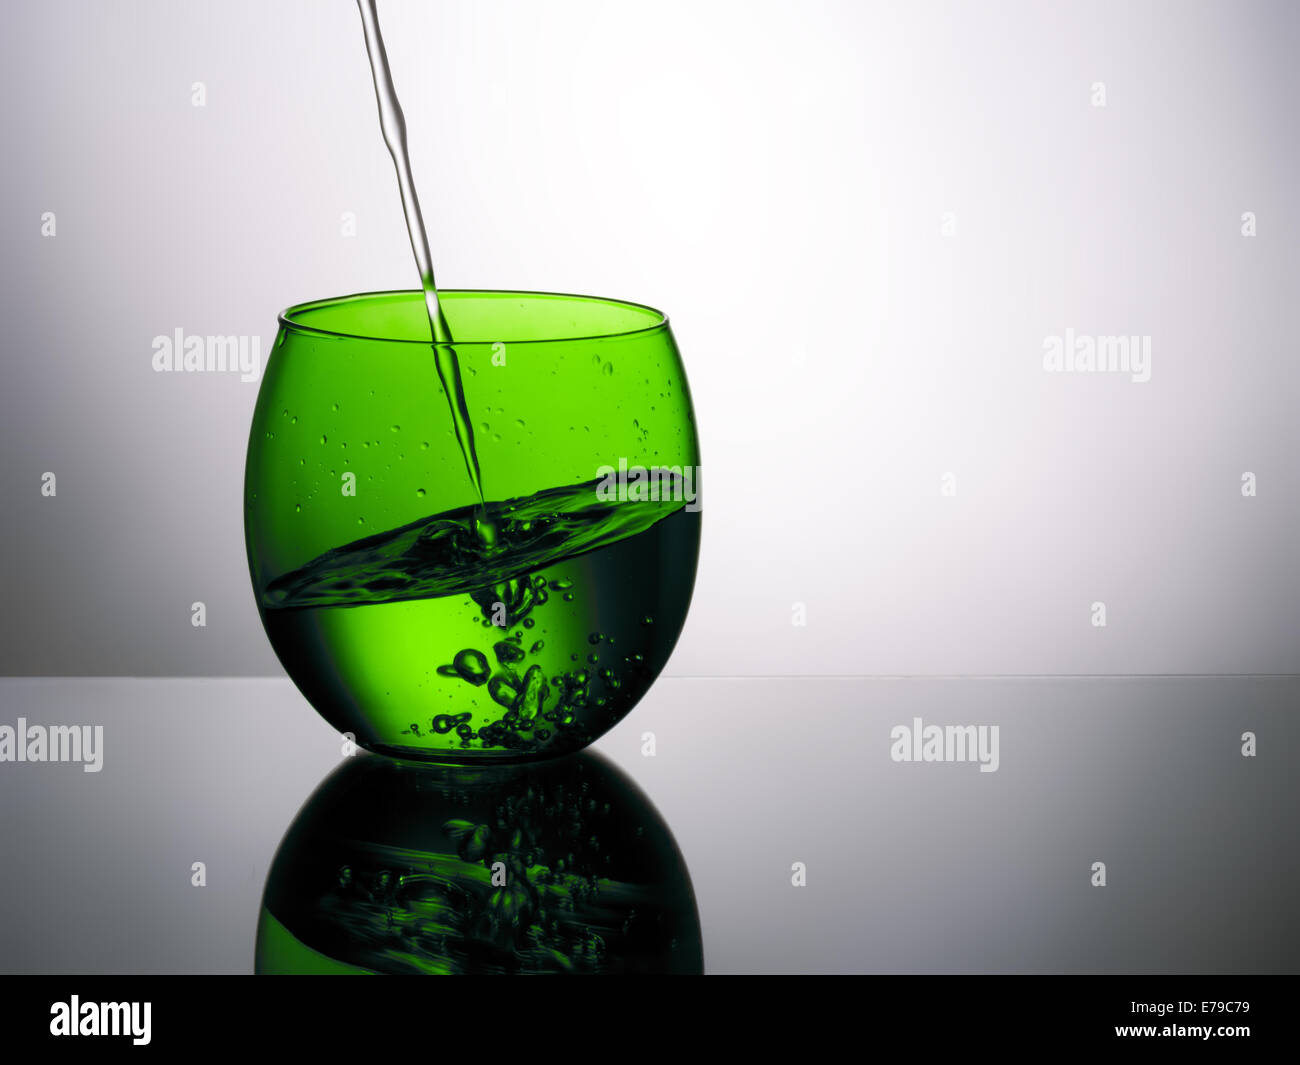 Not your ordinary glass of water! Unusual point of view, new angle metaphor etc. Stock Photo